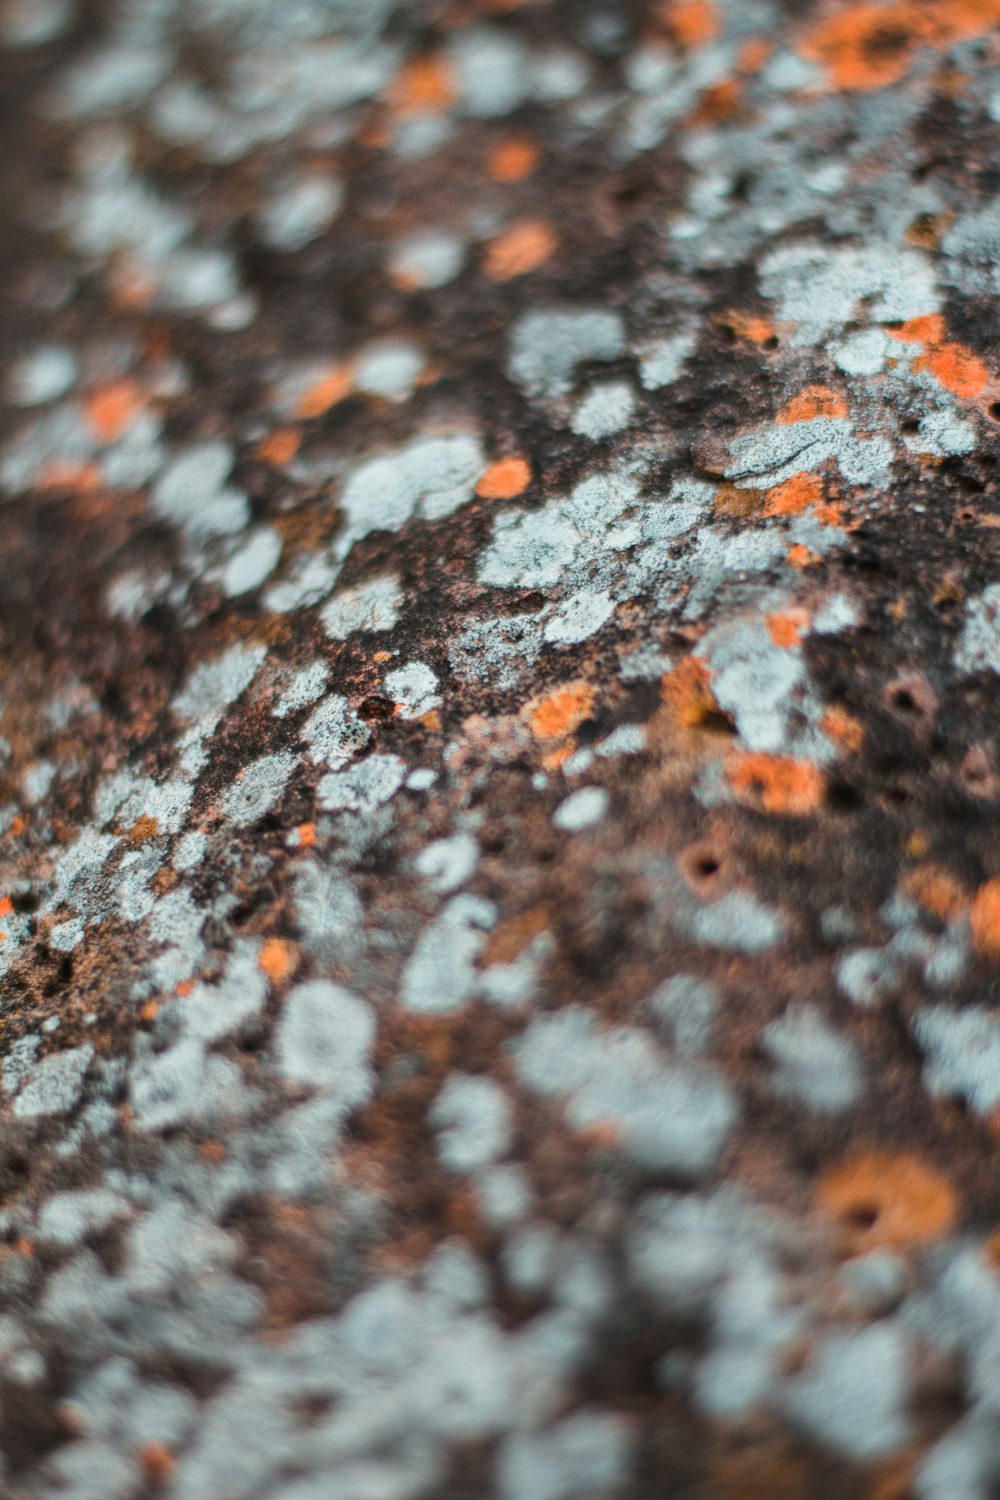 a close up of a rock with orange and white dots